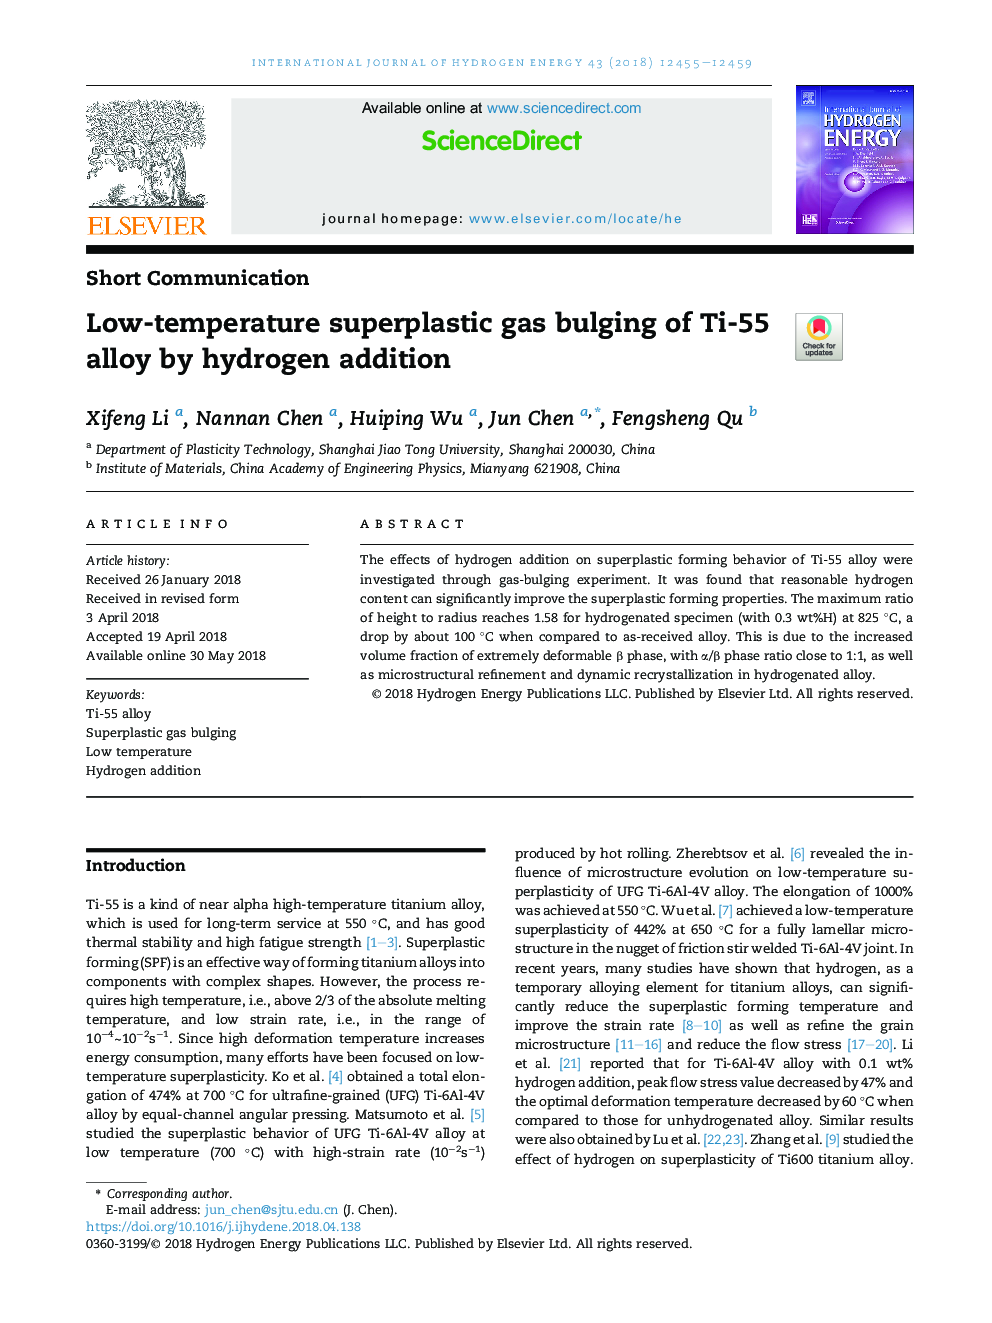 Low-temperature superplastic gas bulging of Ti-55 alloy by hydrogen addition